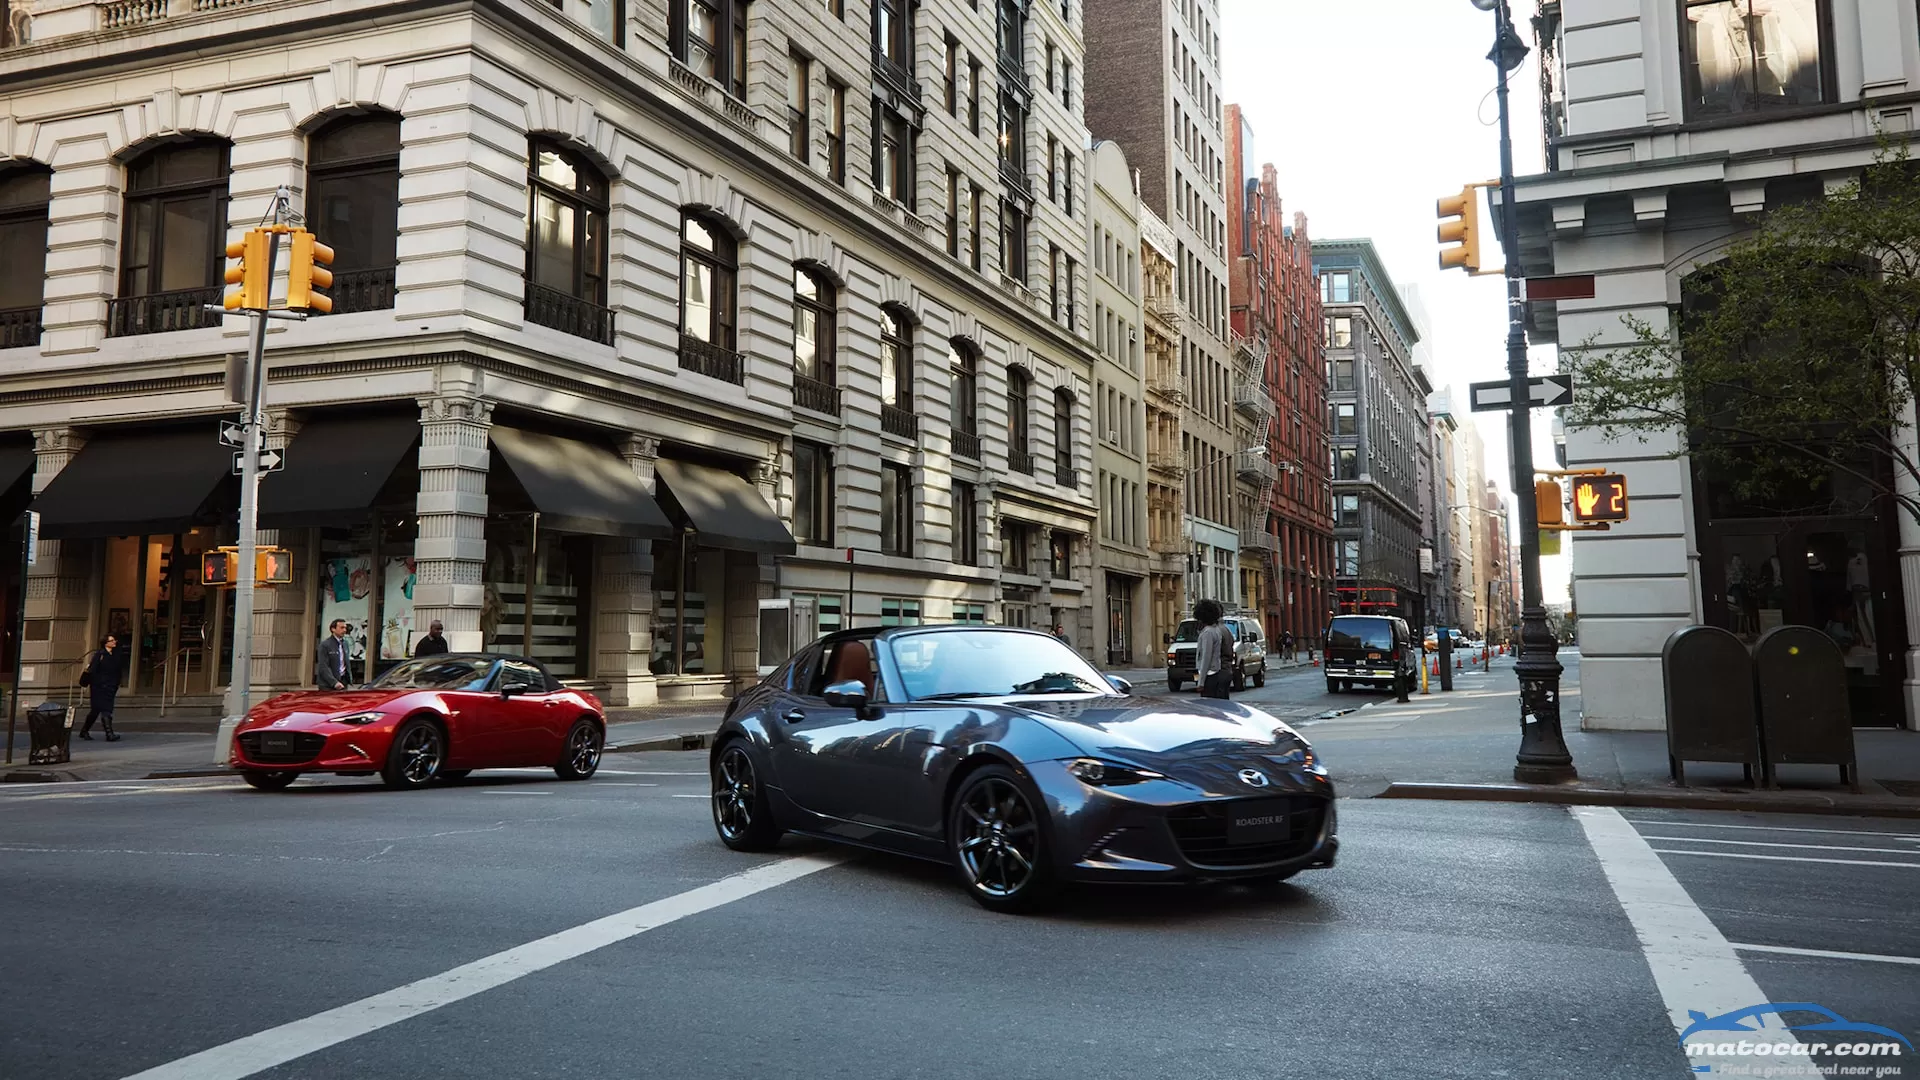 2022 Mazda Cars: What’s New With the 3 and MX-5 Miata